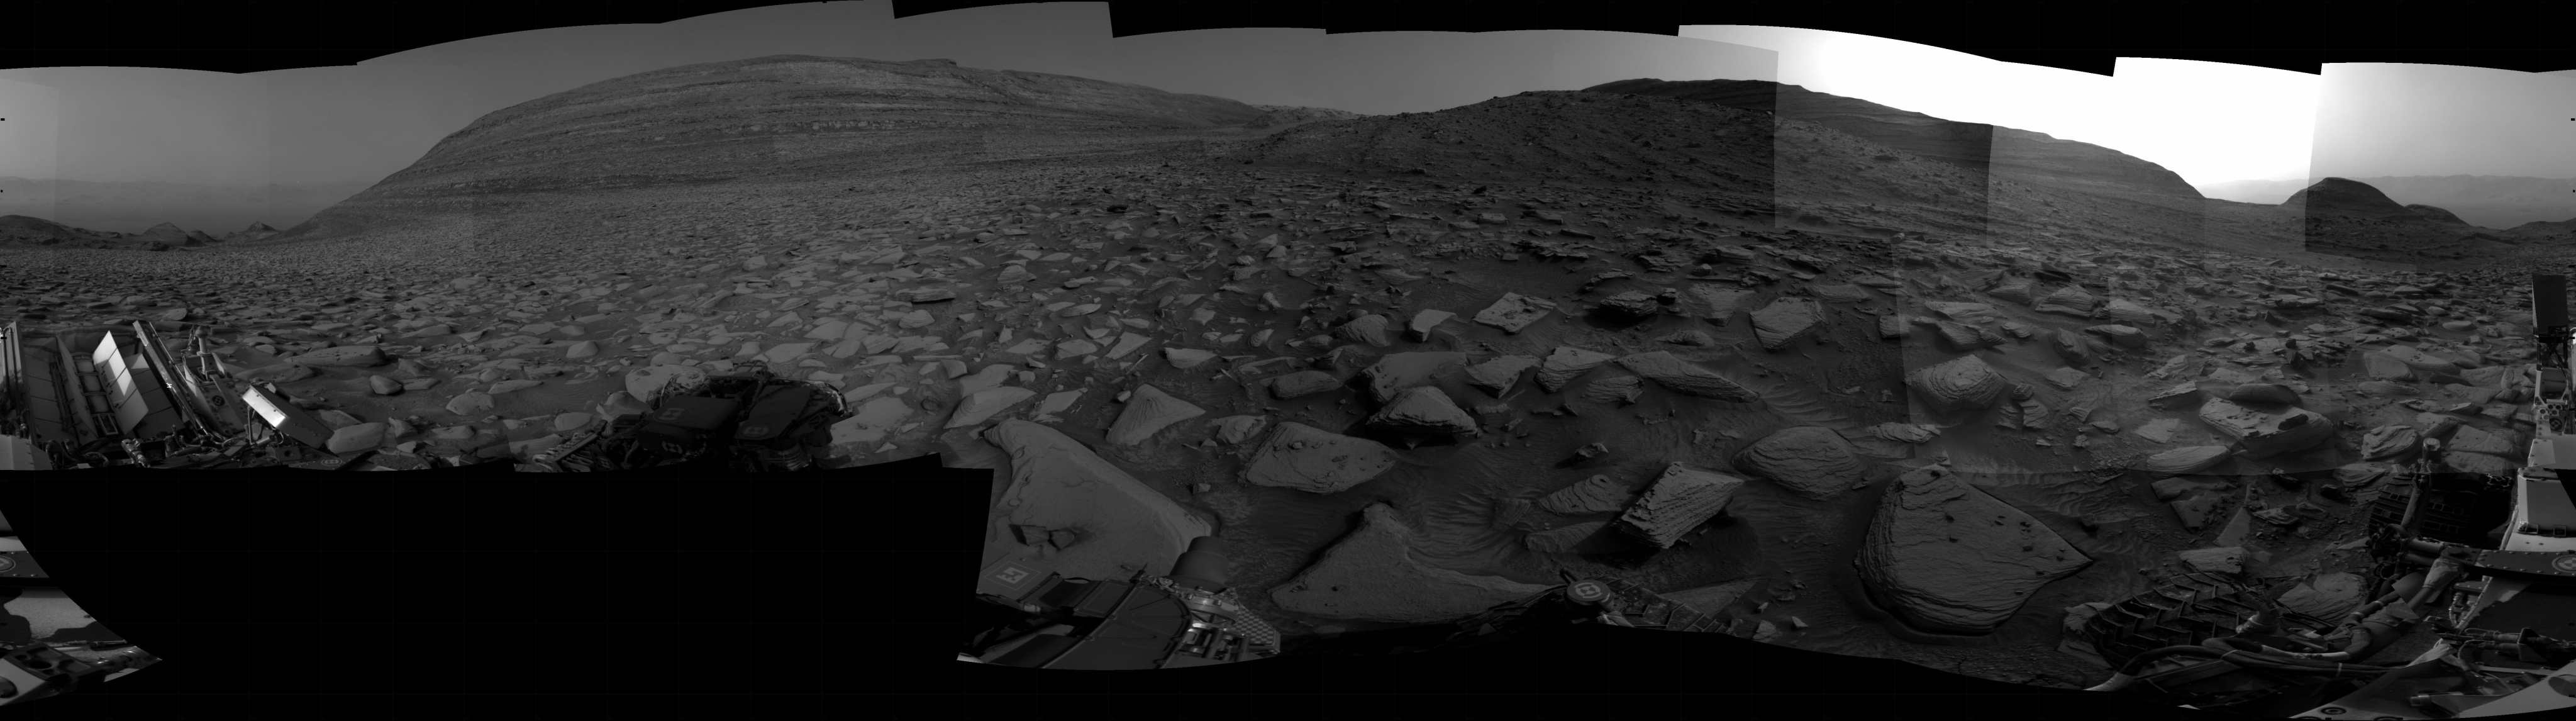 Curiosity took the images on April 24, 2024, Sol 4164 of the Mars Science Laboratory mission at drive 2950, site number 106. The local mean solar time for the image exposures was from 3 PM to 4 PM.